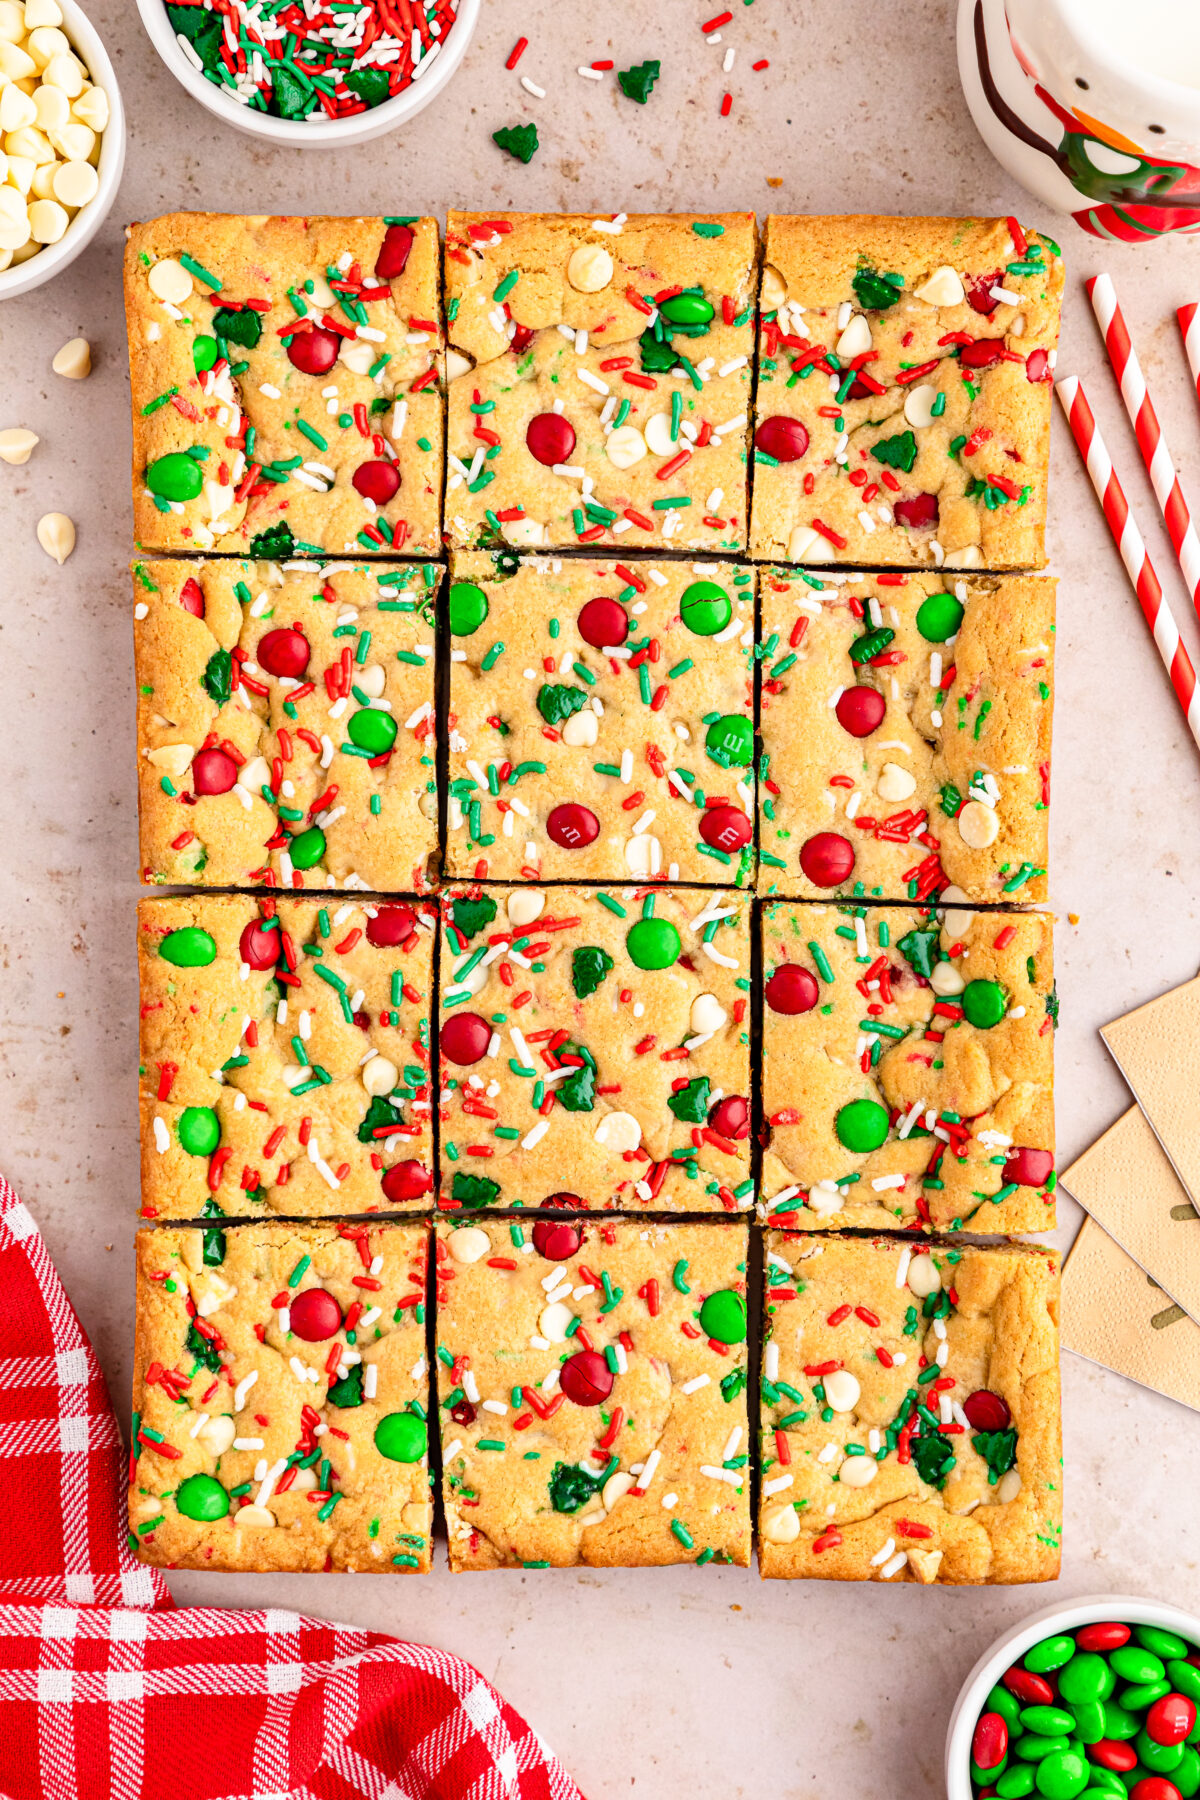 Get into the holiday spirit with these yummy M&M Christmas cookie bars! They're easy, need only basic ingredients, and are sure to be a hit.